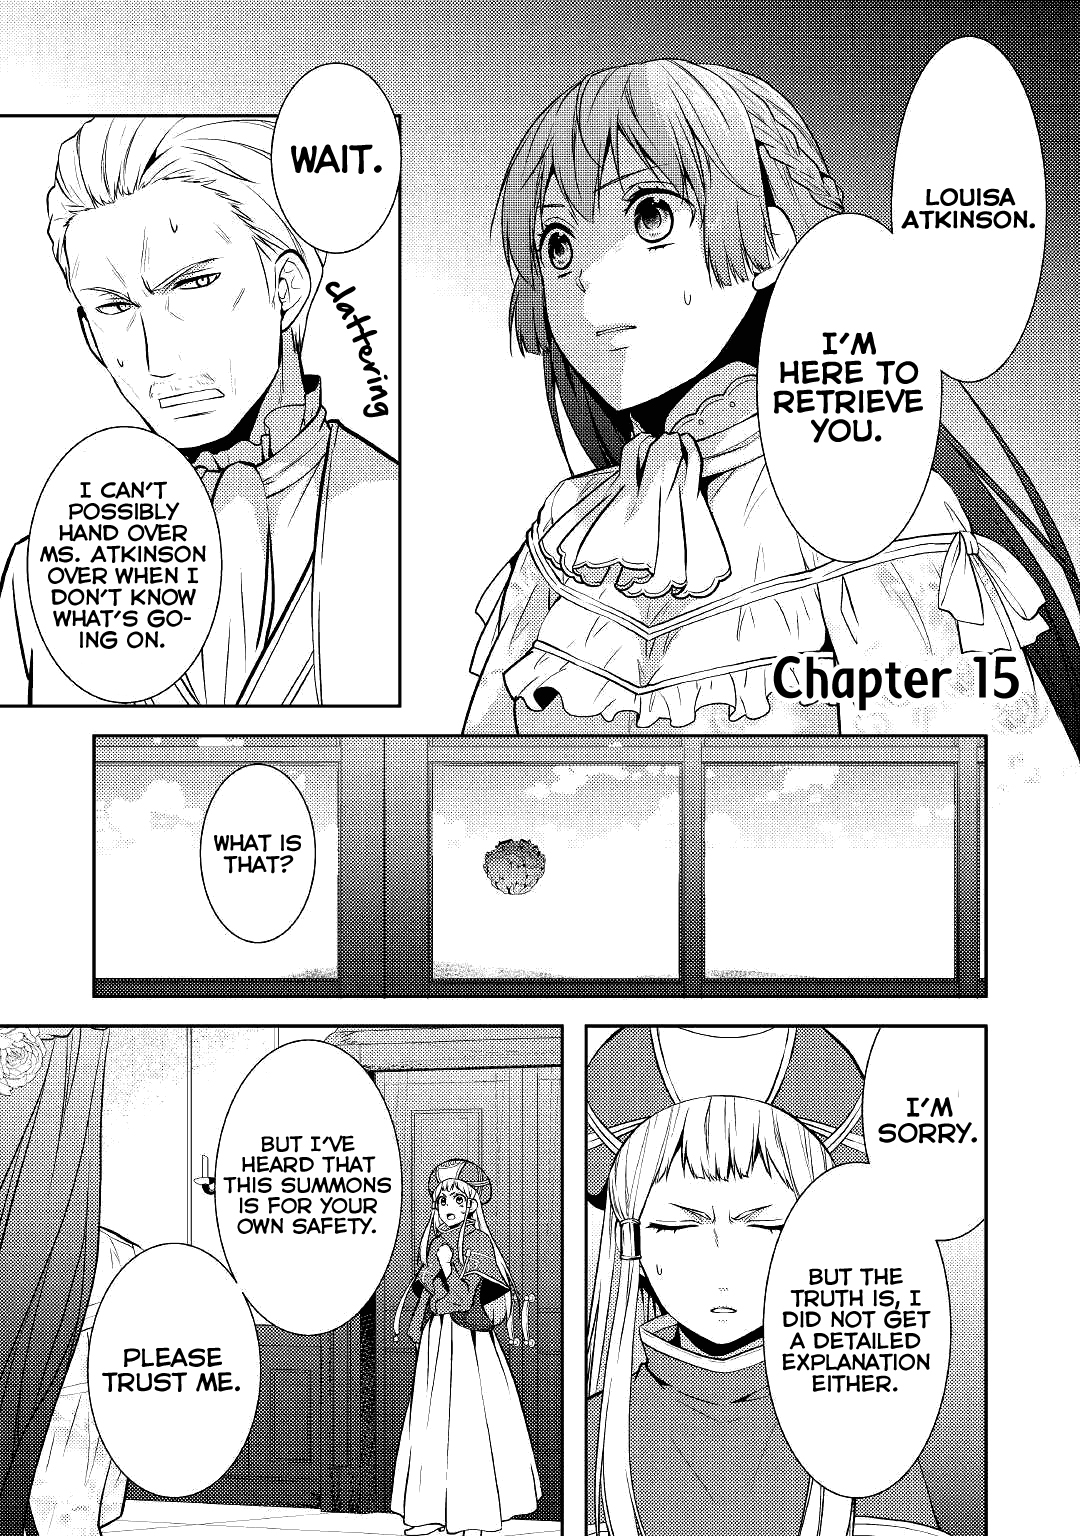 This Time I Will Definitely Be Happy! Vol. 2 Ch. 15